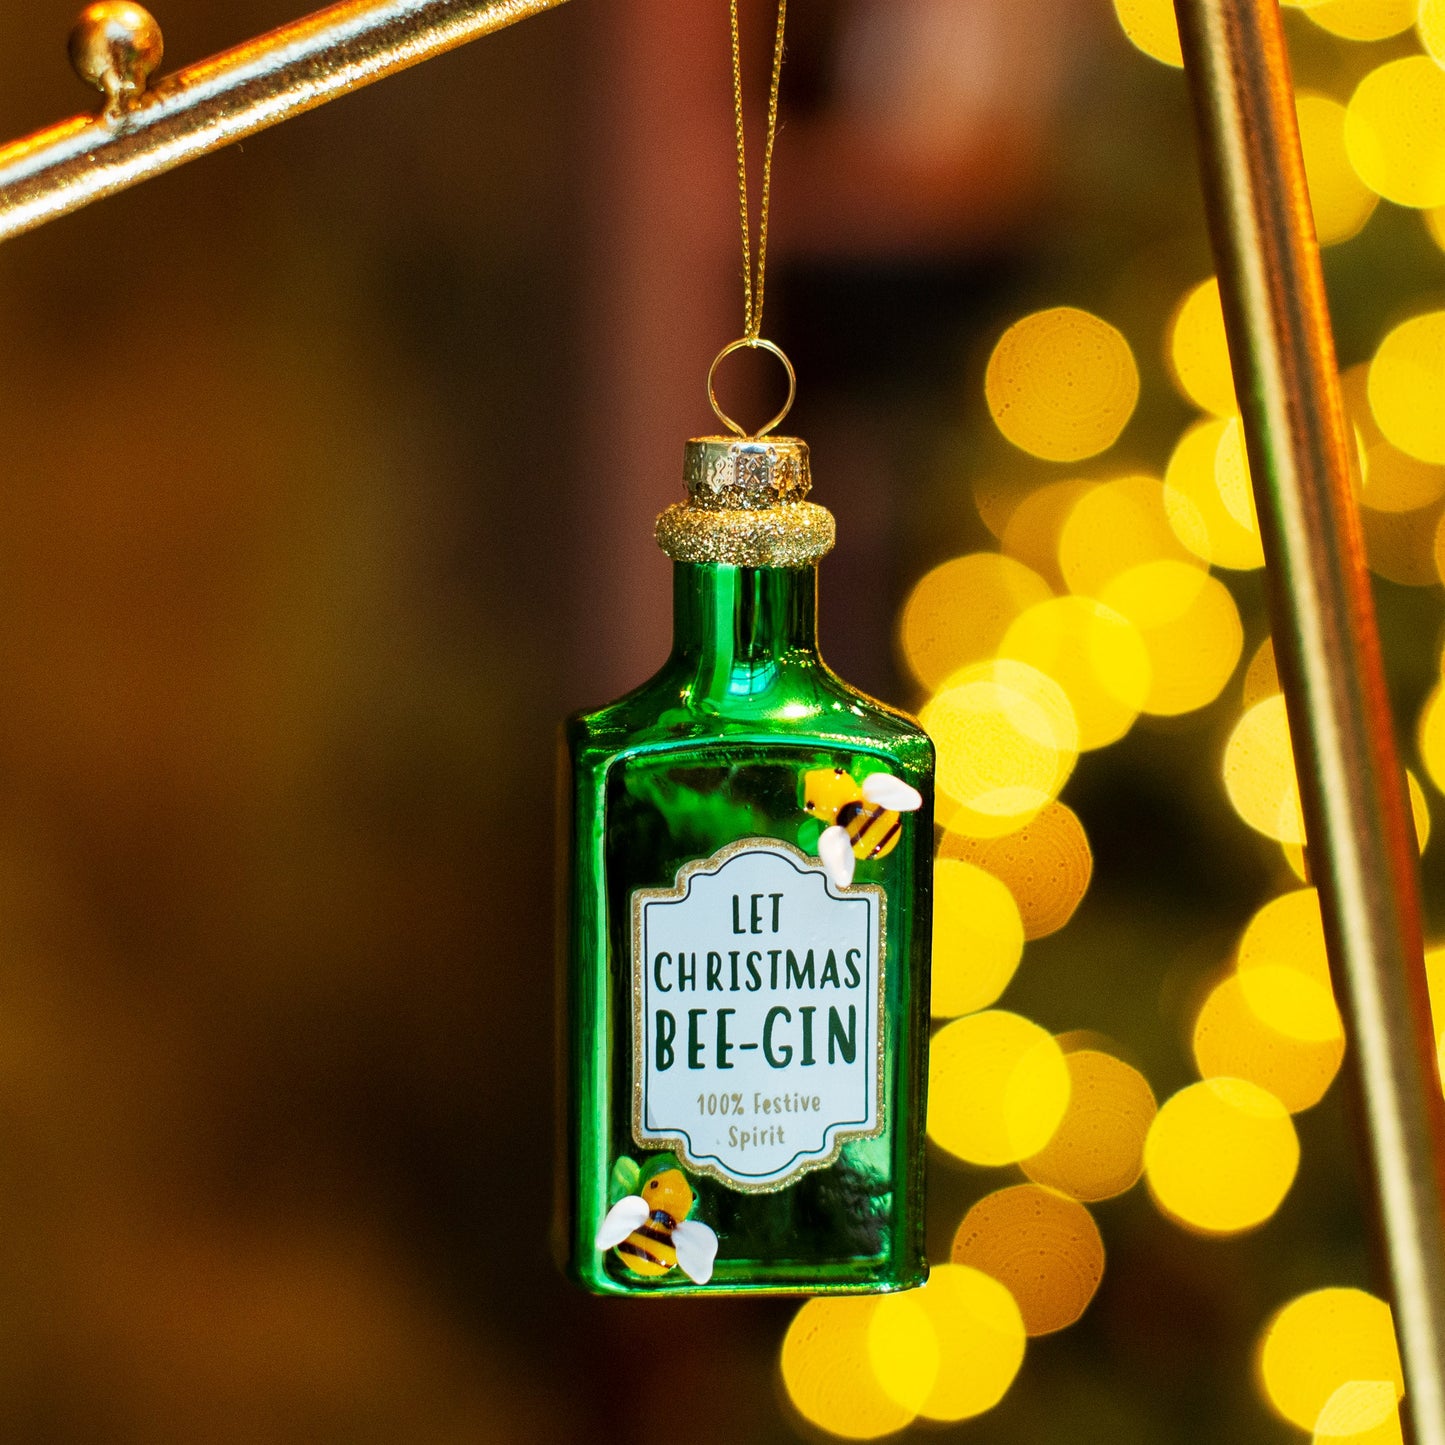 'Let Christmas Bee-Gin' Green Bottle Hanging Bauble